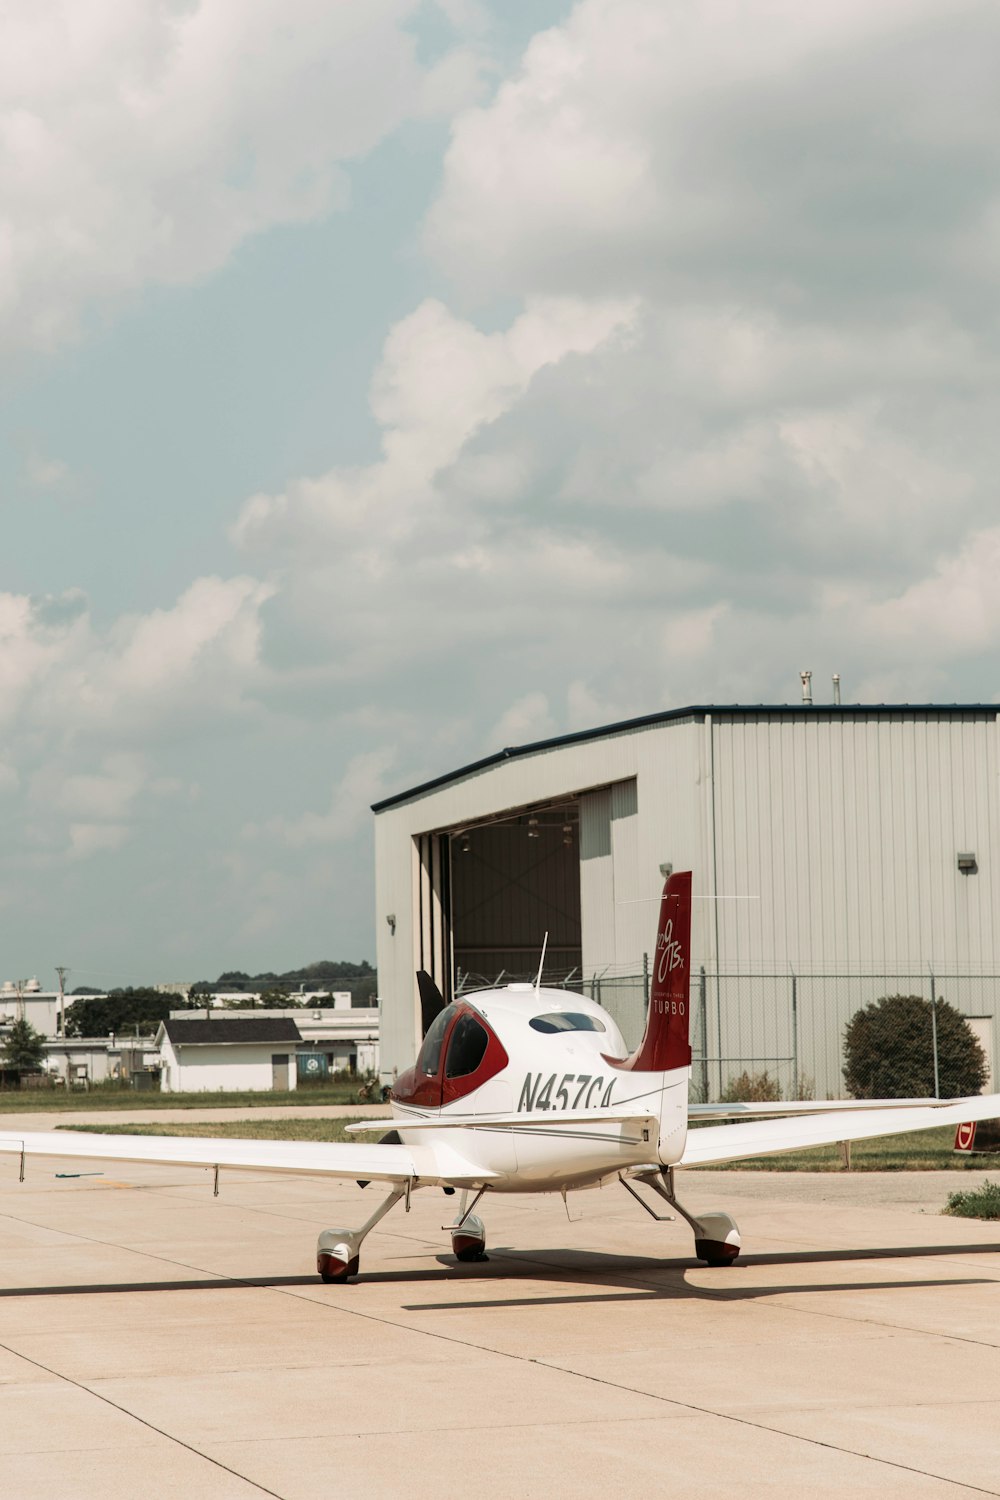 a small airplane parked in front of a hangar